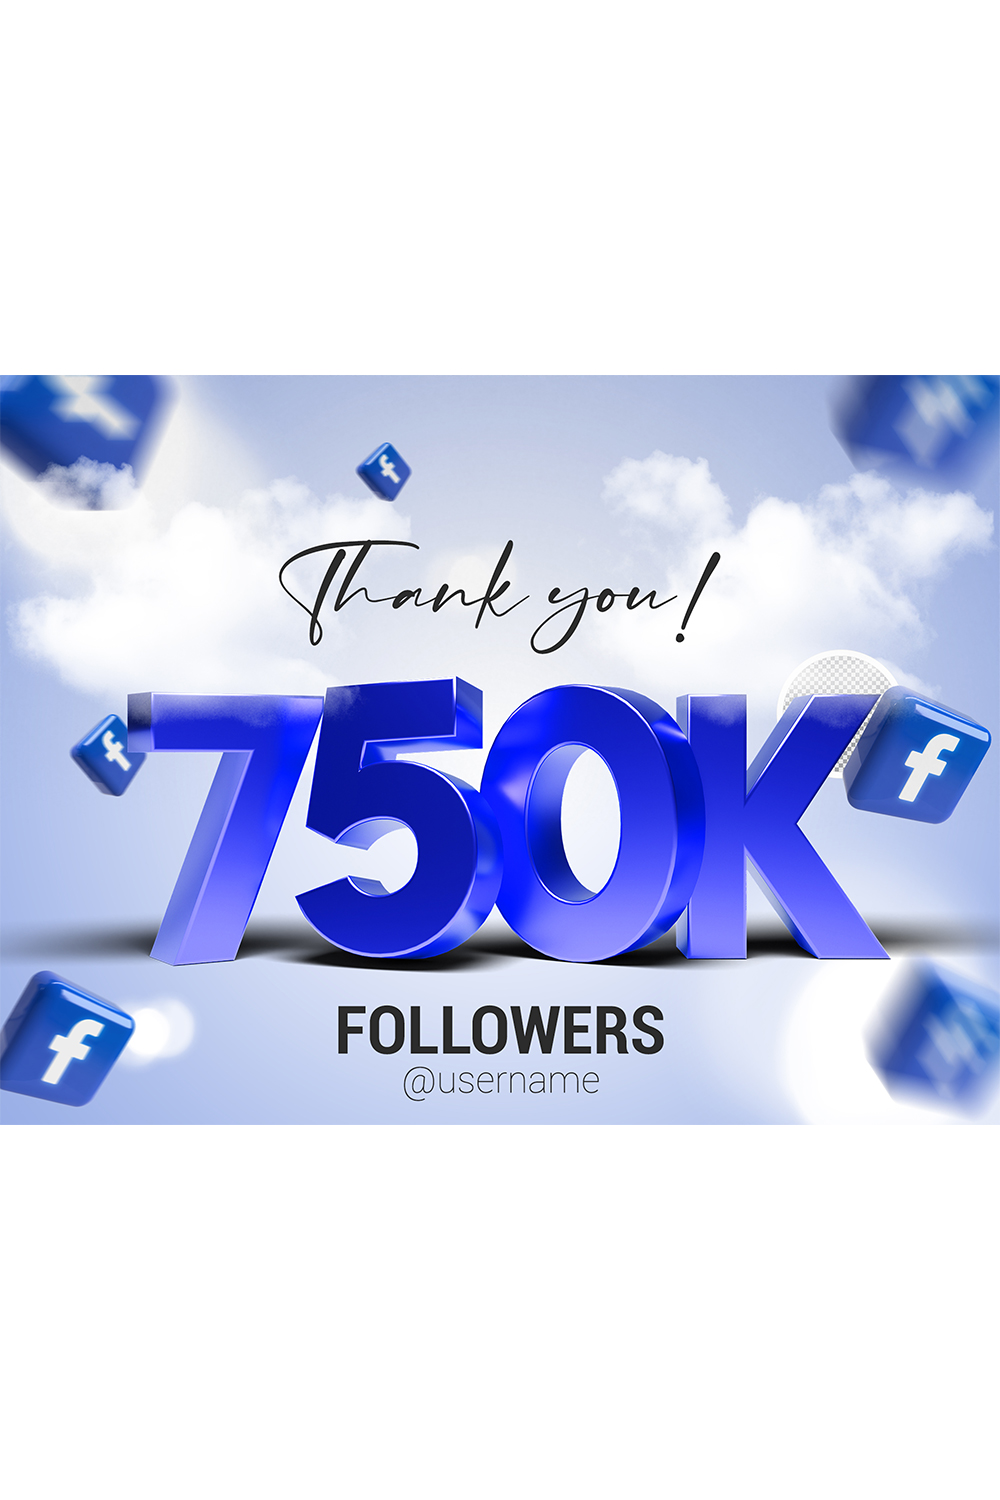 750K Followers In Facebook PSD pinterest preview image.